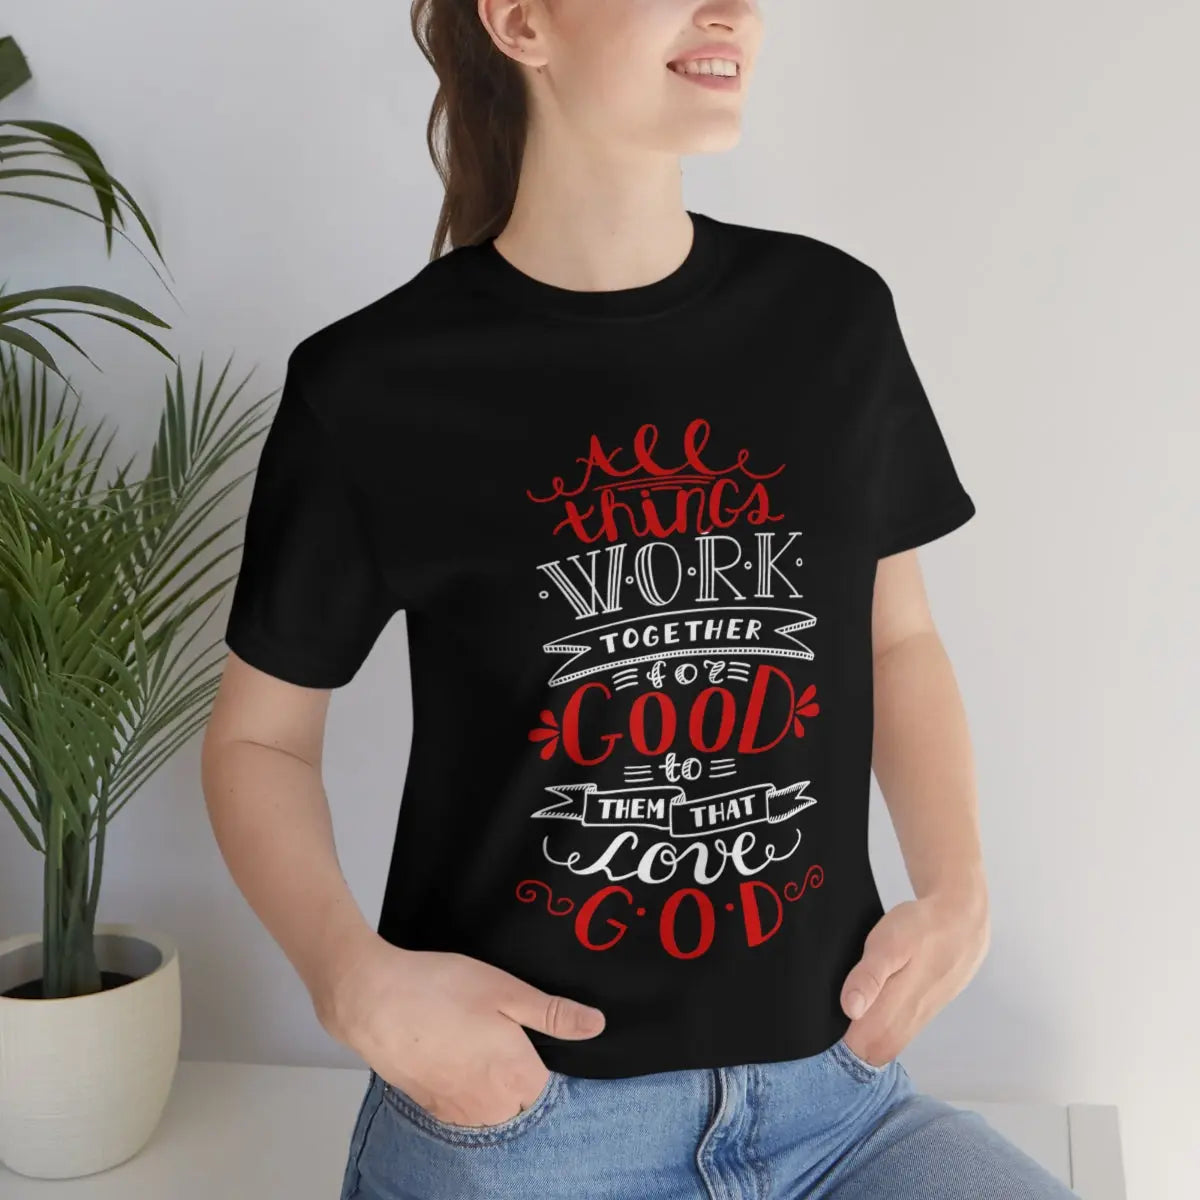 All Things Work Together for Good Tee,  Scripture Unisex T-shirt, Romans 8:28 Printify